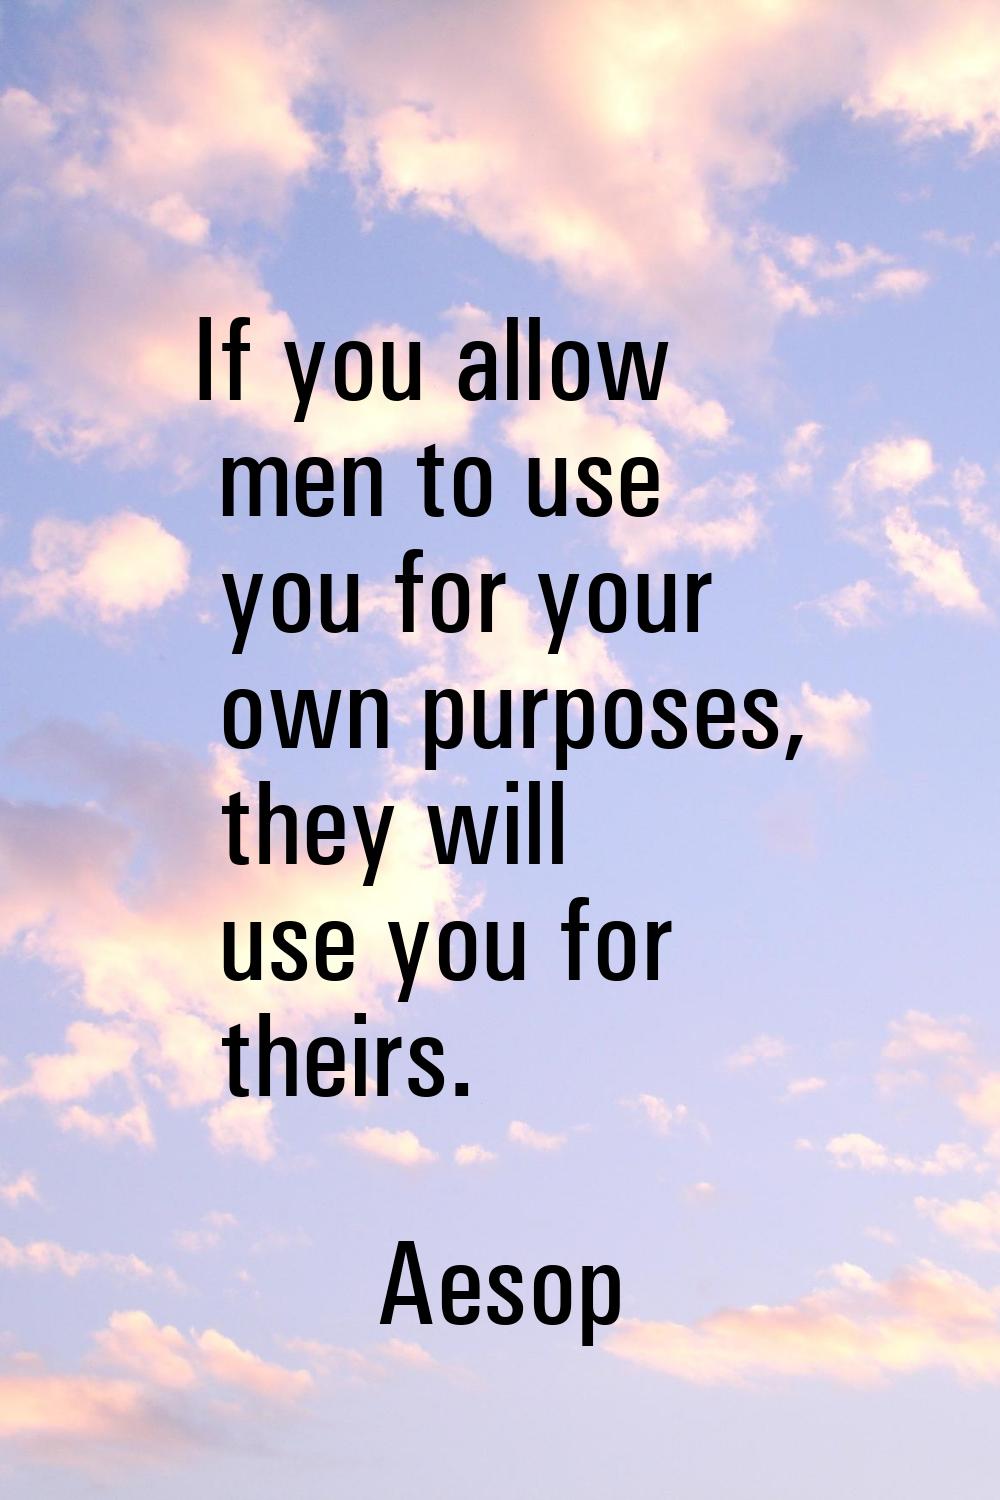 If you allow men to use you for your own purposes, they will use you for theirs.